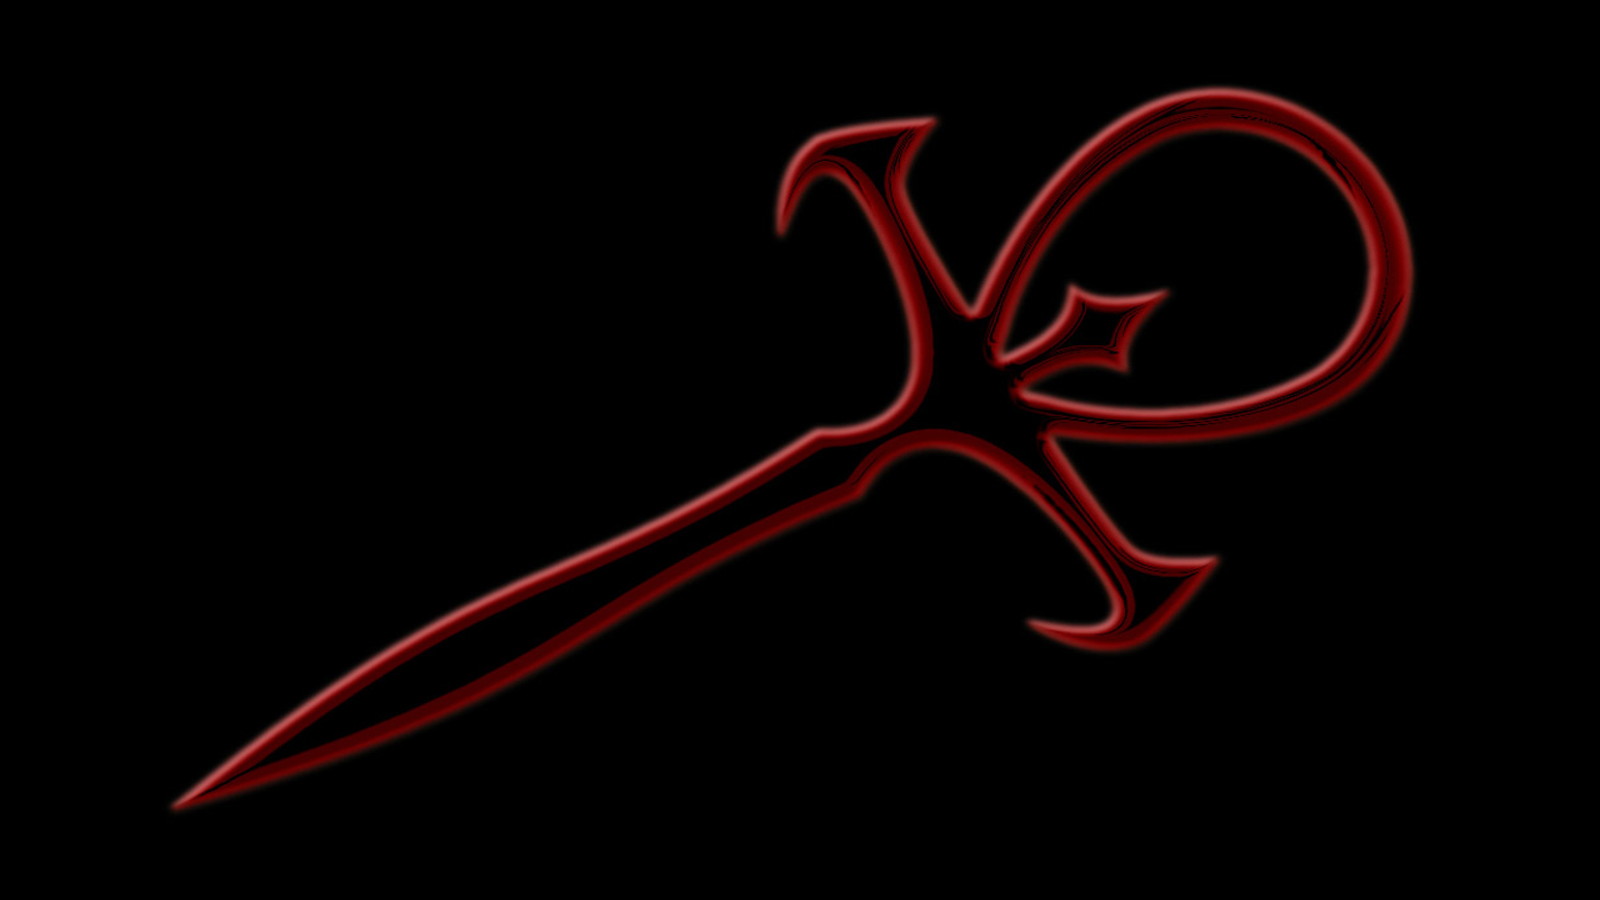 New Fan Patch For 'Vampire: The Masquerade - Bloodlines' Released